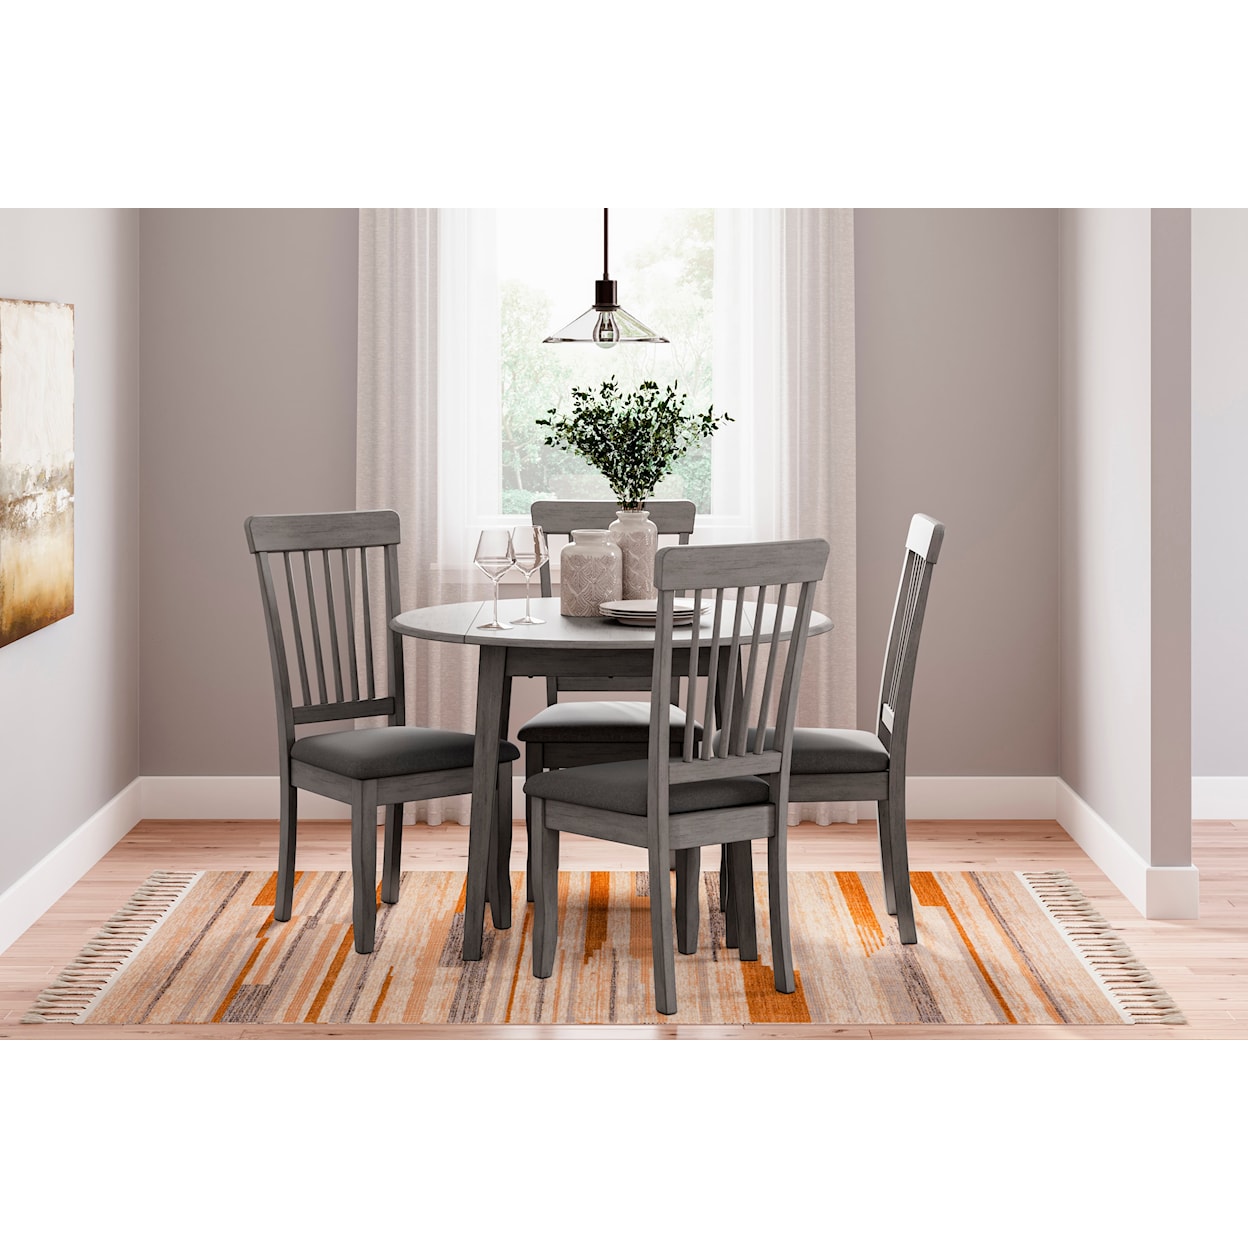 Signature Design by Ashley Shullden 5-Piece Dining Set